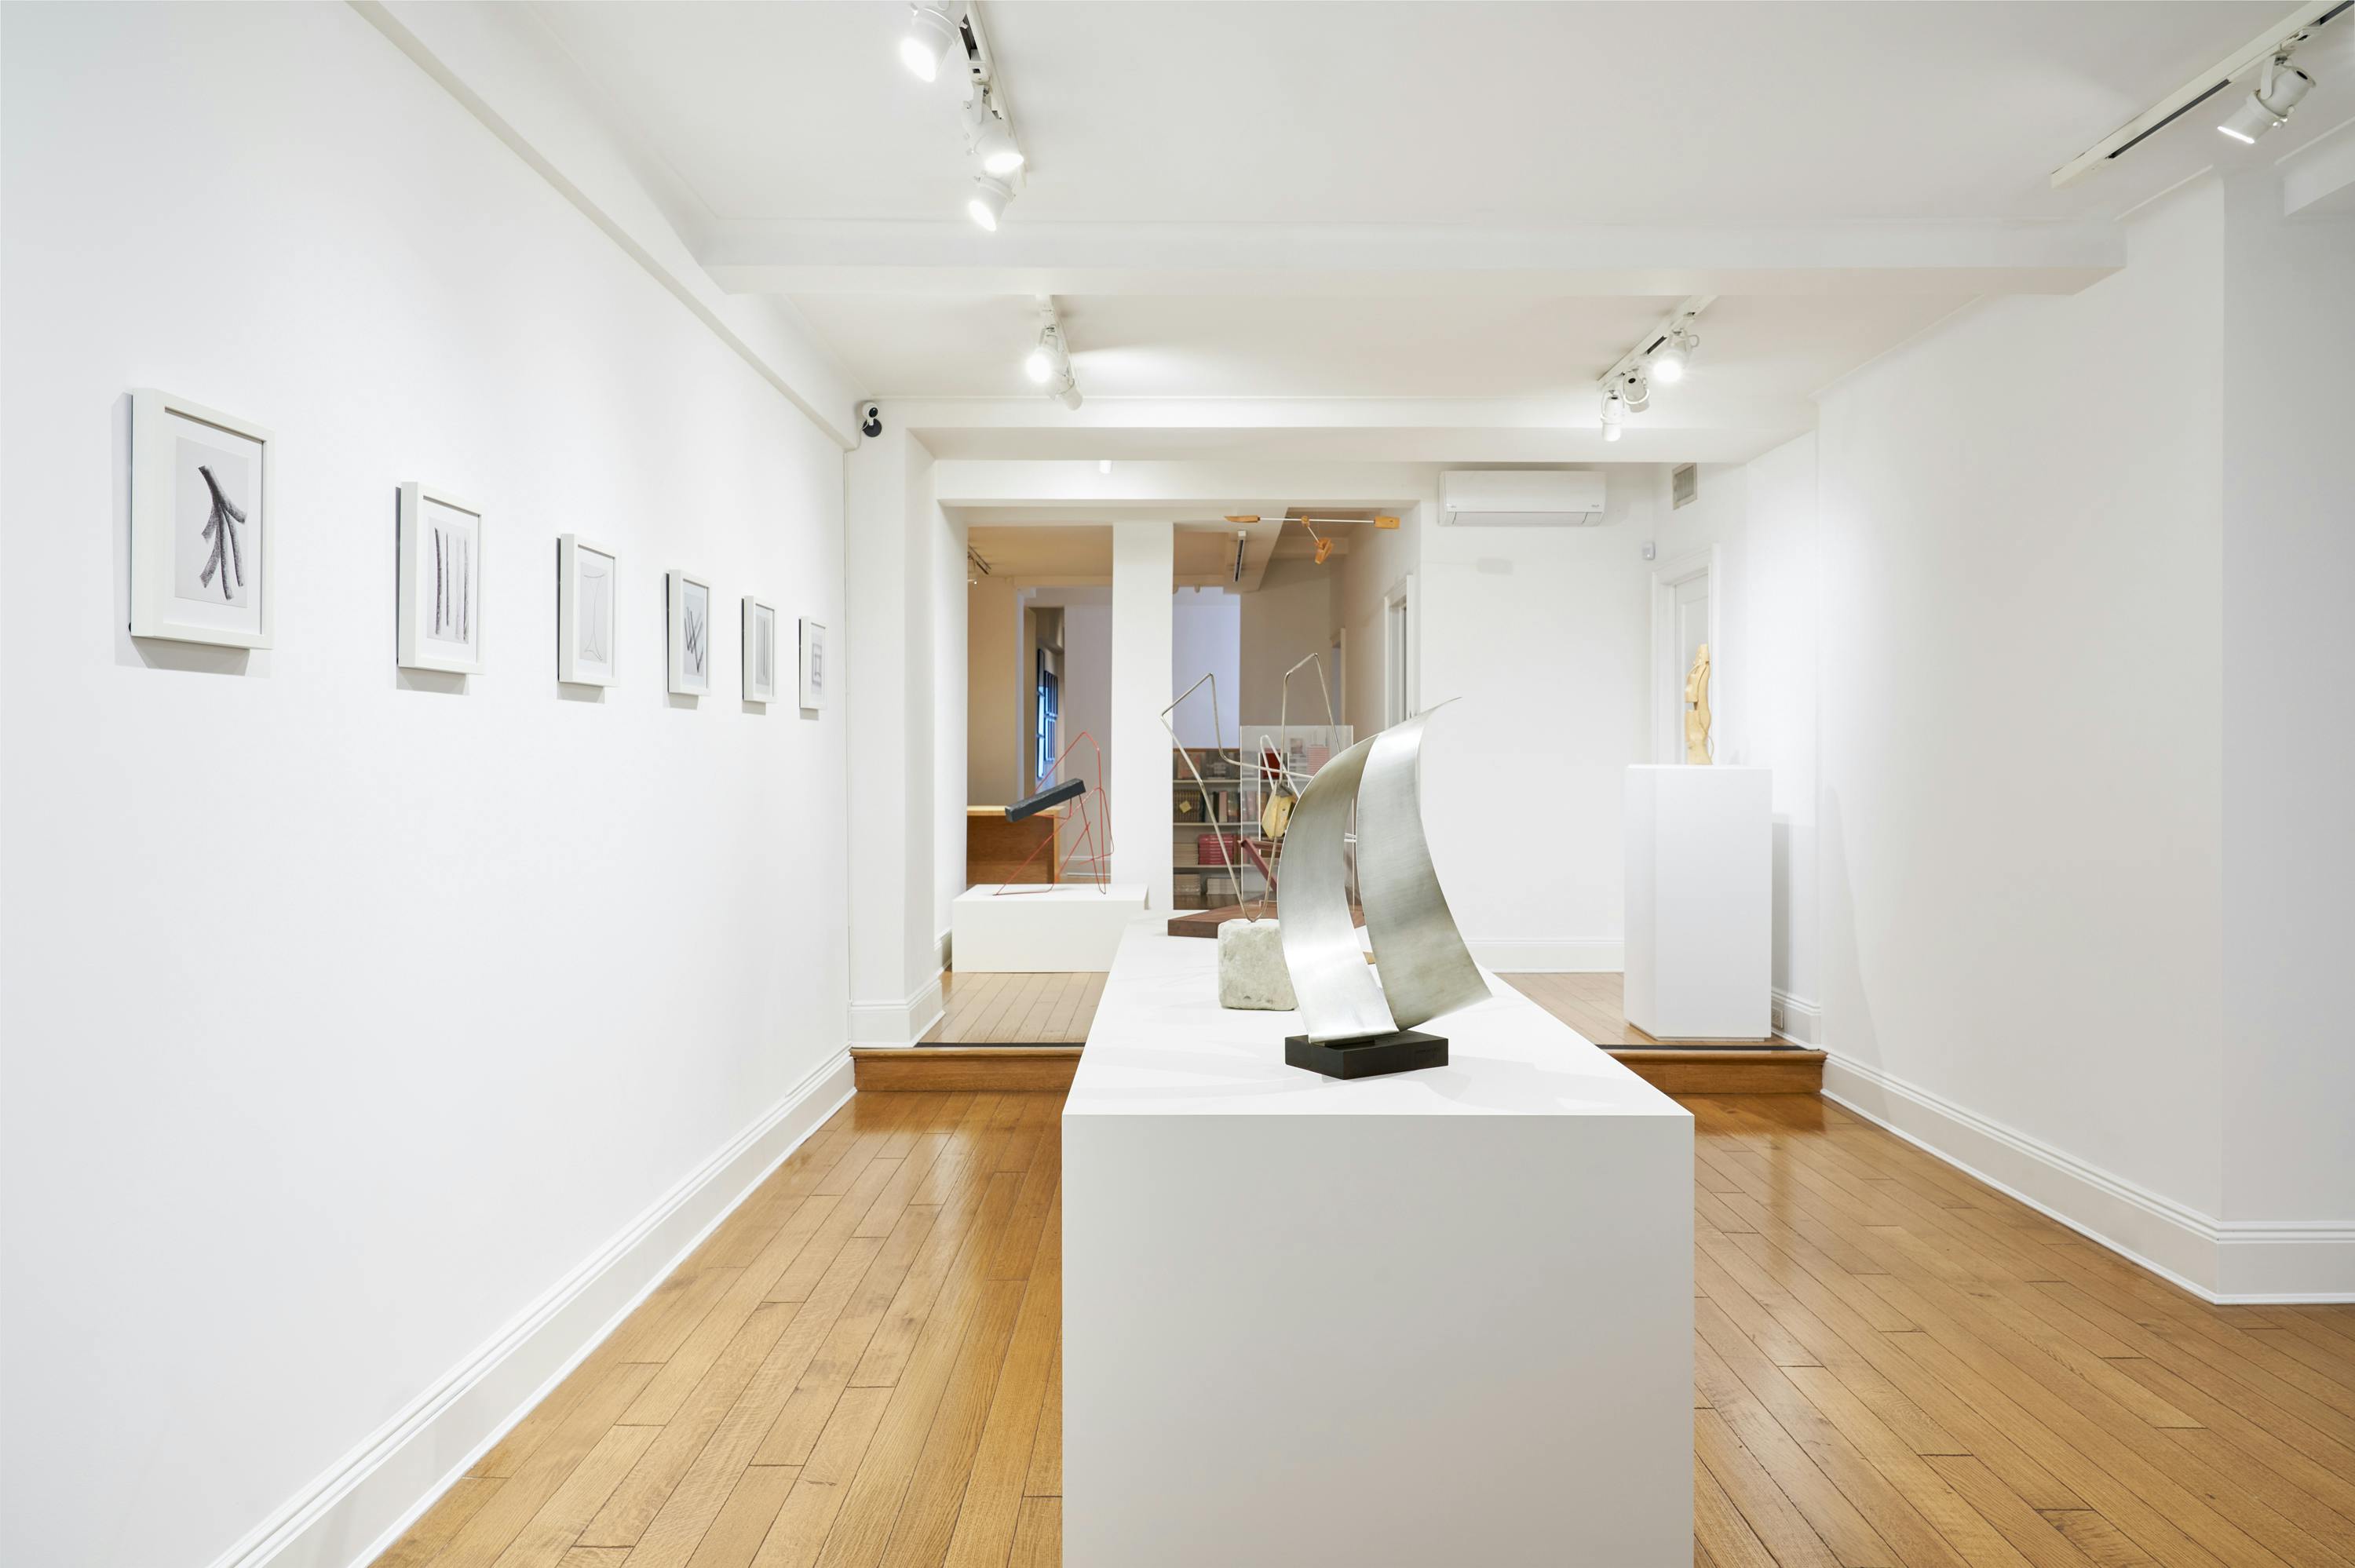 Gallery view of From Surface to Space exhibition showing one hanging sculpture, five free-standing sculptures, and six wall-mounted drawings.